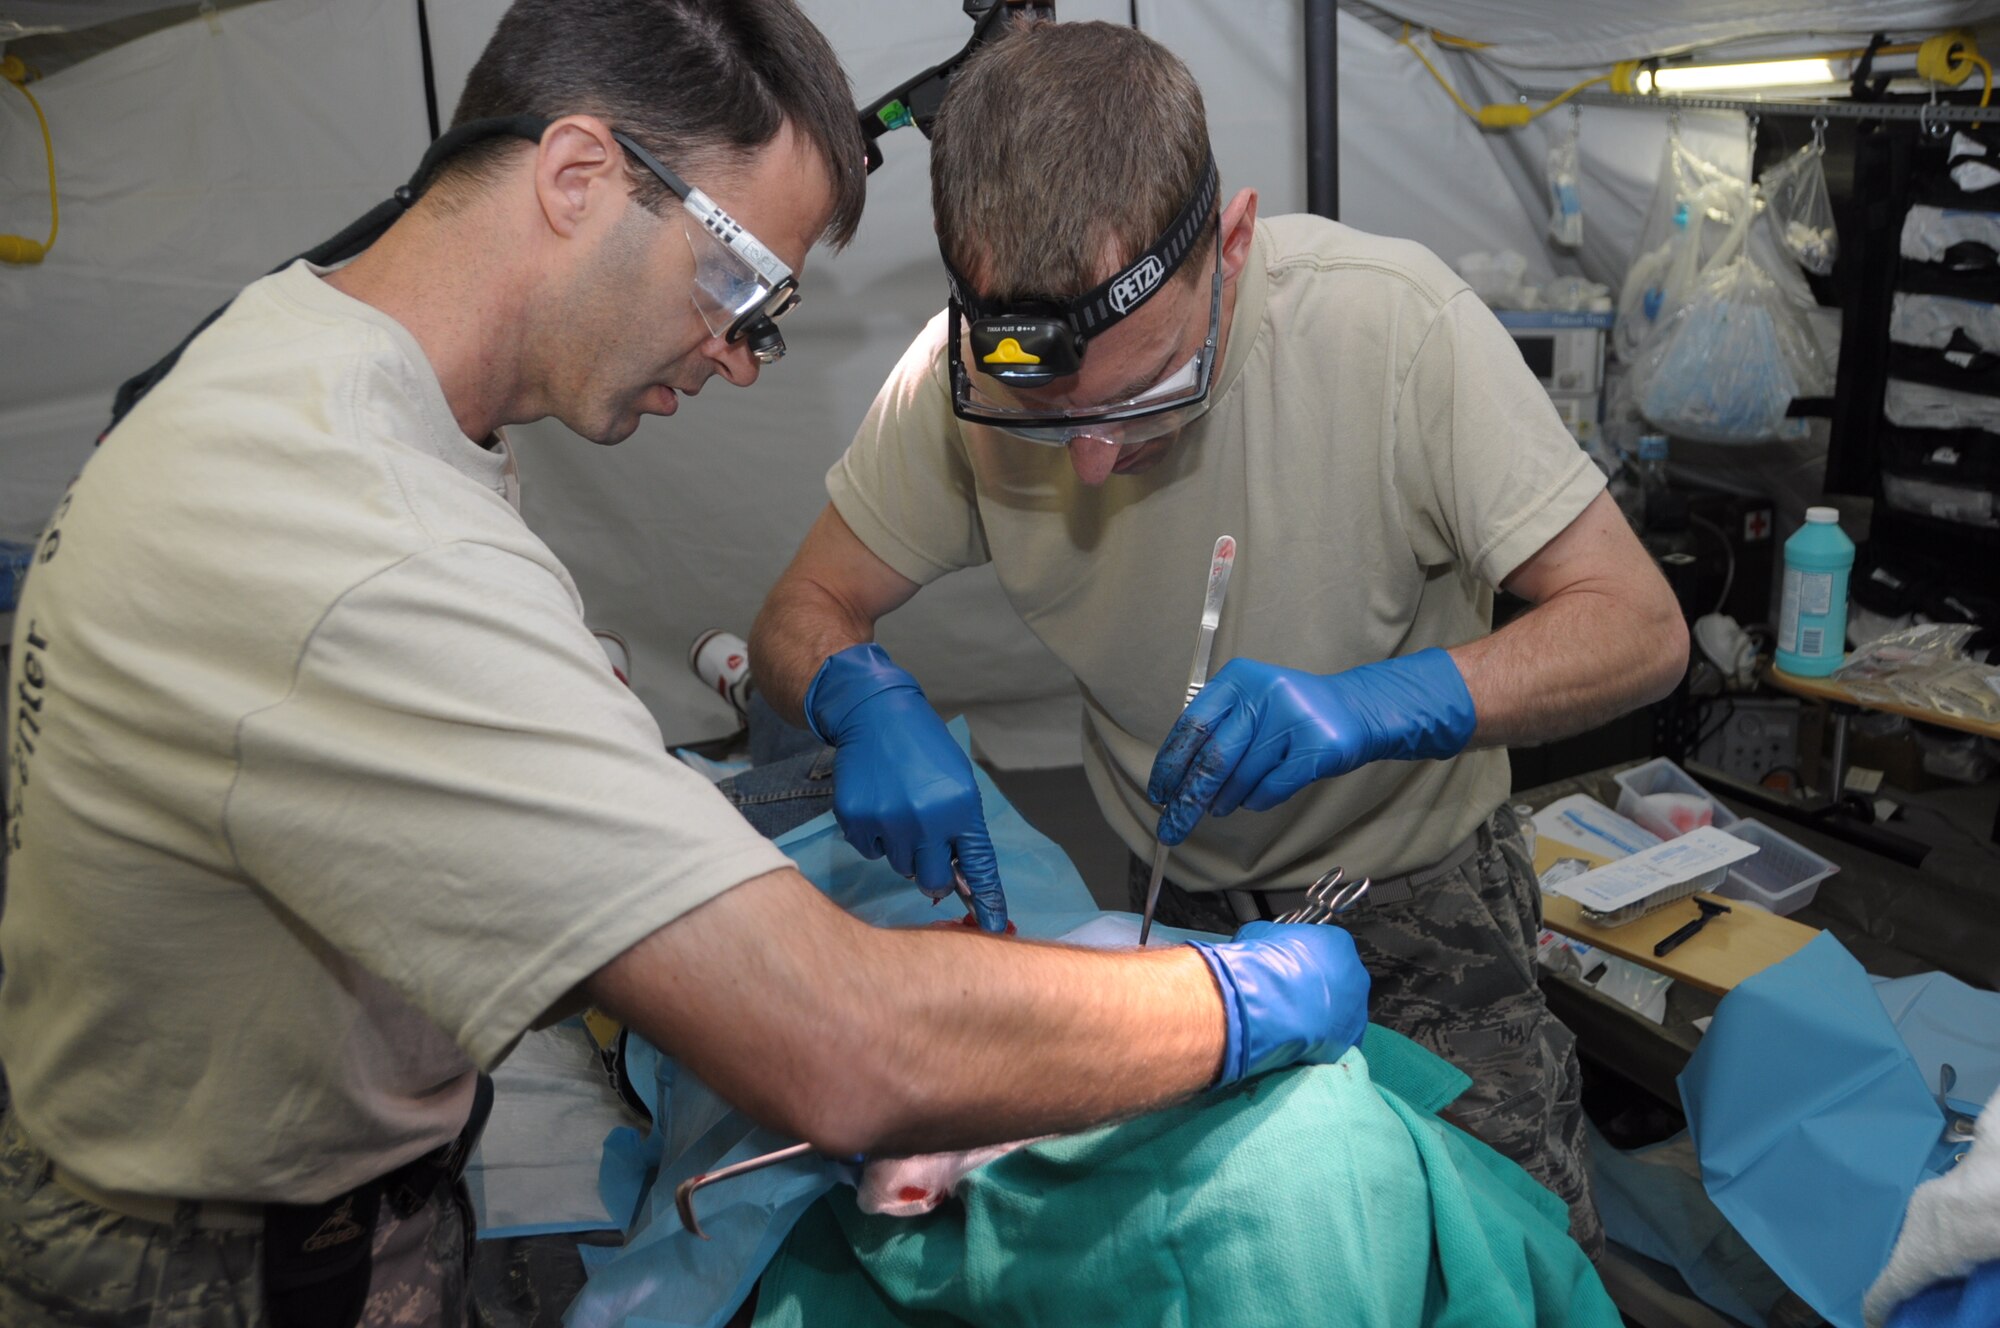 U.S. Air Force Maj. Cale Bonds, 60th Medical Group orthopedic surgeon and Lt Col Mark Scherrer, 60th Medical Group general surgeon extract tissue from a patient at Cumuto Barracks in Trinidad and Tobago April 9, 2011. Bond and Scherrer are members of the Expeditionary Medical Support Health Response Team in support of the Allied Forces Humanitarian Exercise/Fuerzas Aliadas or FA HUM 2011. (U.S. Air Force photo by 2d Lt Joel Banjo-Johnson/Released)
